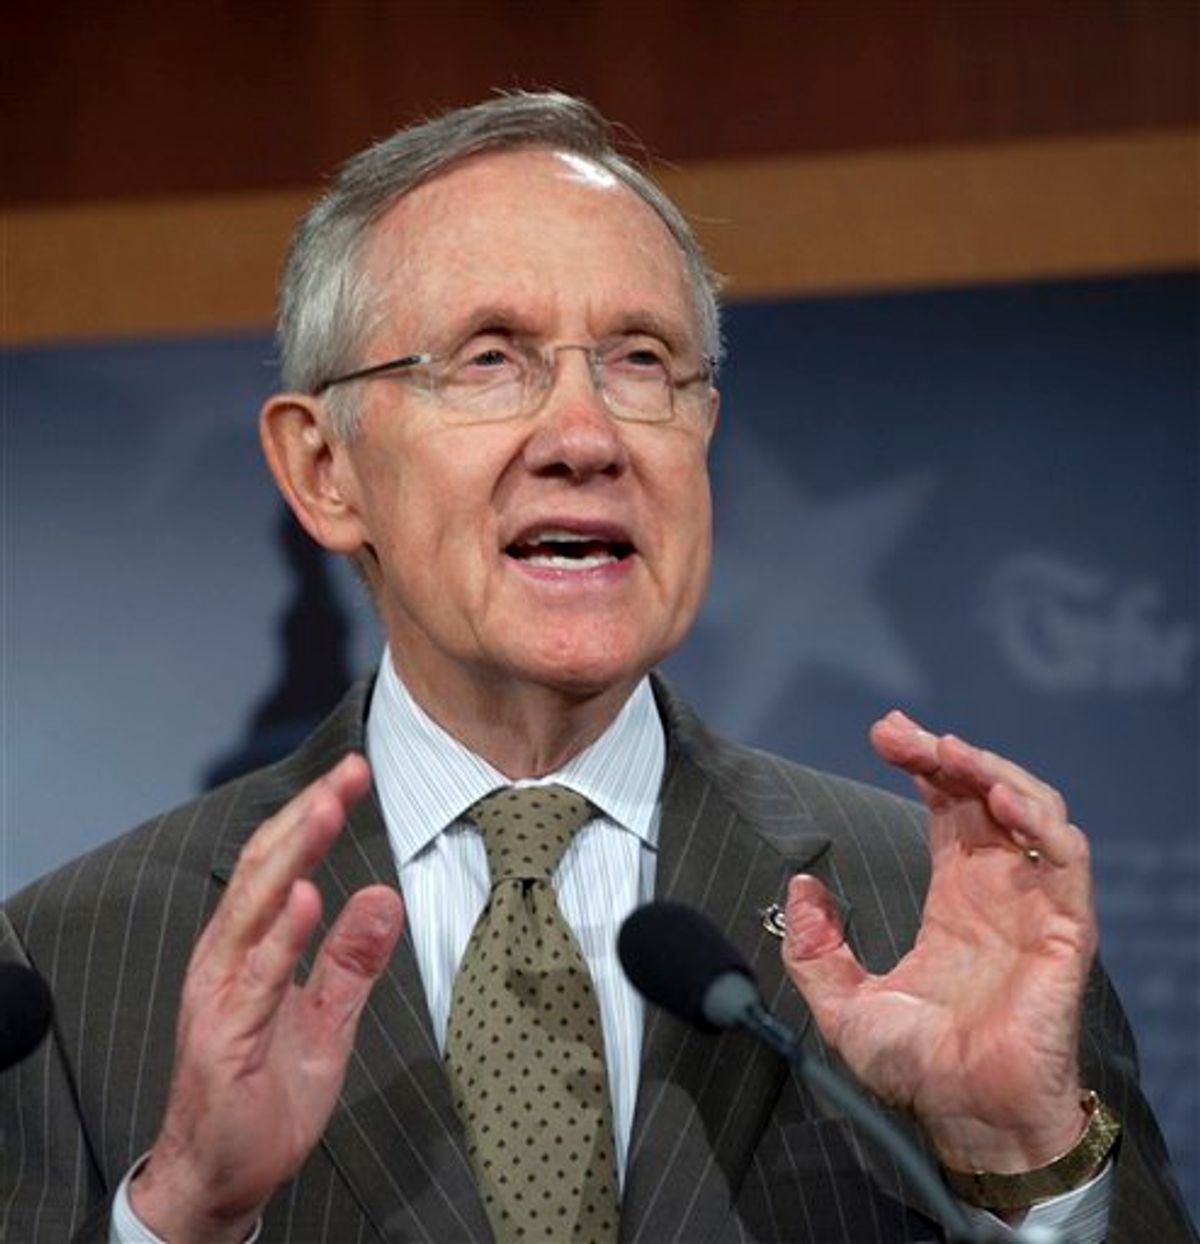 Senate Majority Leader Harry Reid of Nev. gestures during a news conference on Capitol Hill in Washington on Thursday, Sept. 22, 2011, to discuss FEMA funding and the Continuing Resolution to fund the government. (AP Photo/Harry Hamburg) (AP)